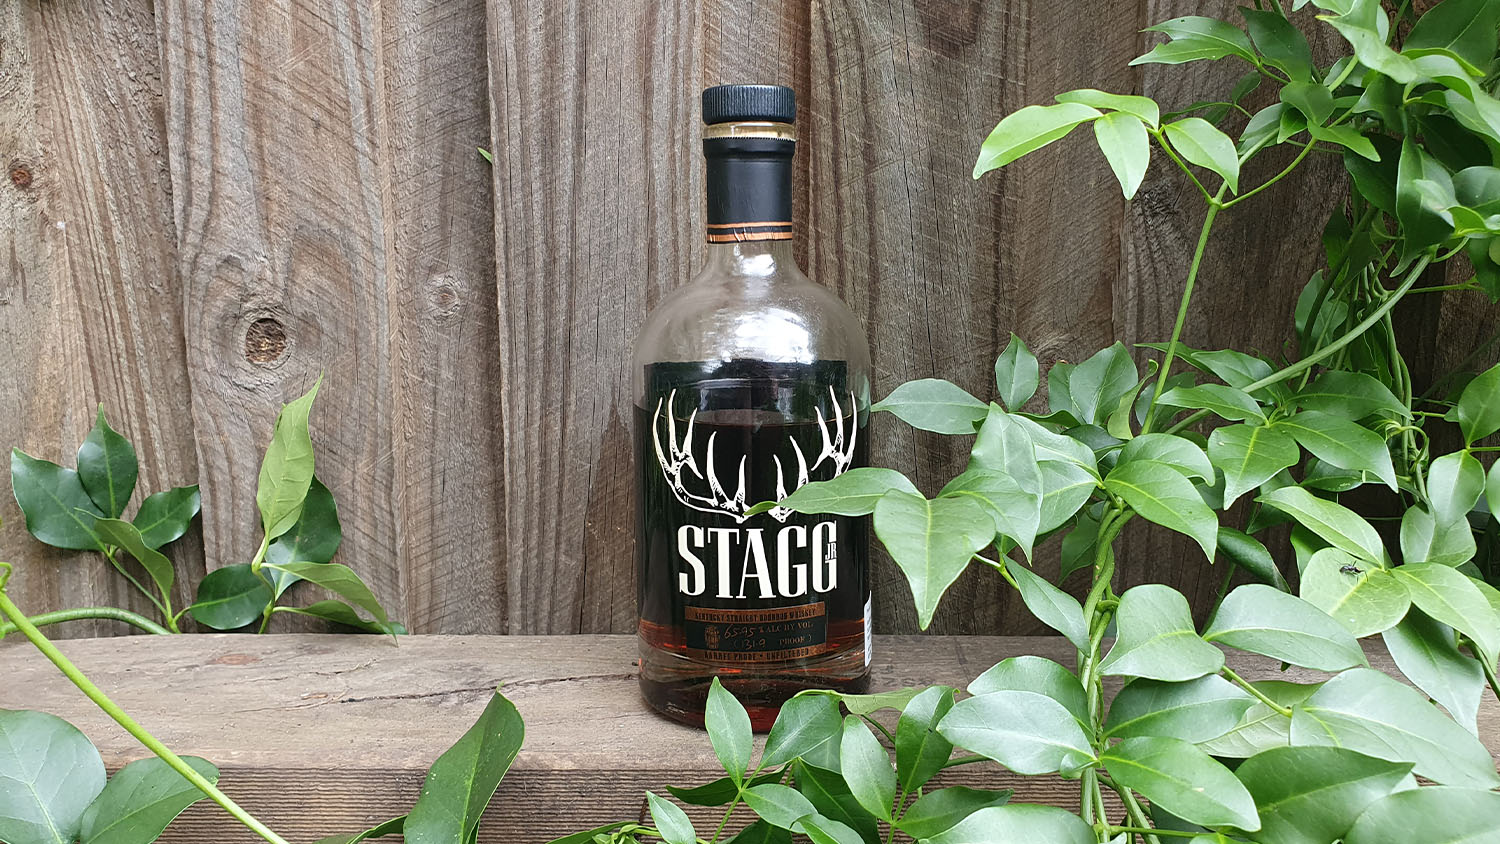 Stagg Jr Batch 9 Bourbon Whiskey Review